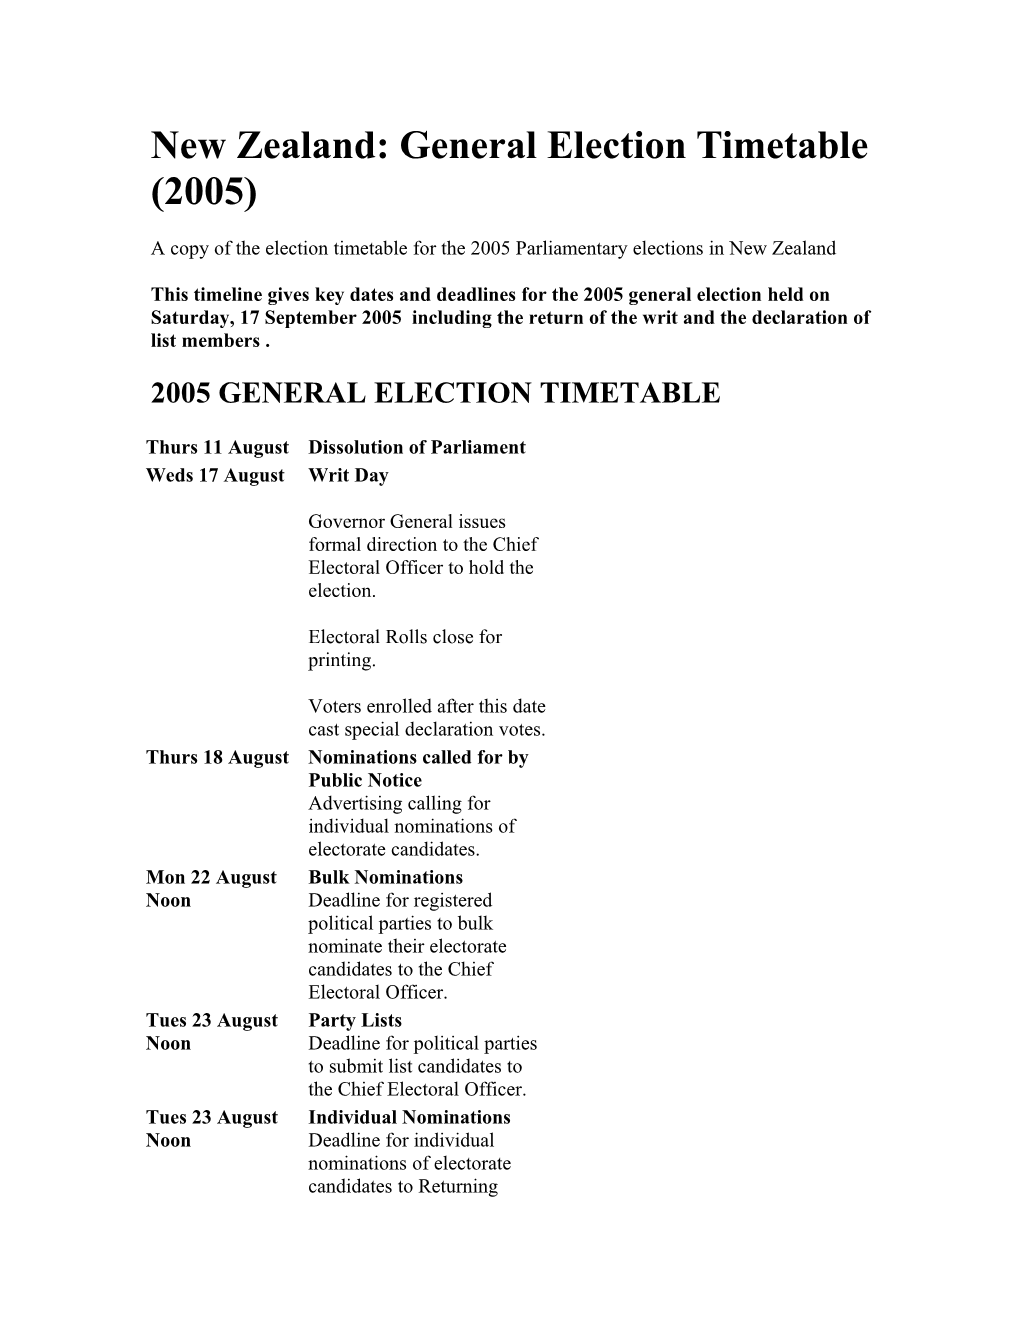 New Zealand: General Election Timetable (2005)